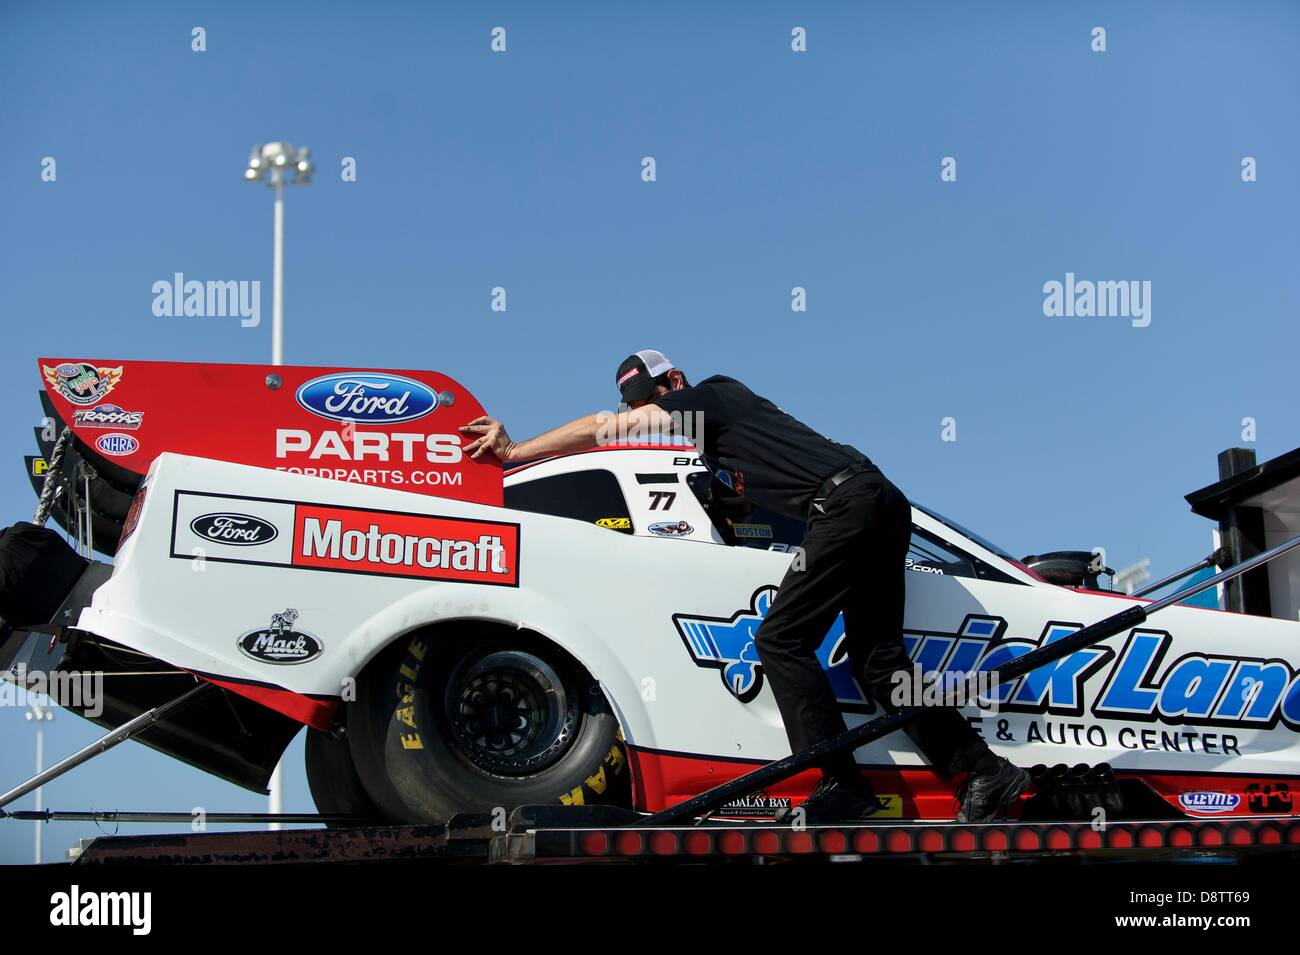 June 1, 2013 - Englishtown, New Jersey, U.S - June 01, 2013: Workers unload the Ford Motorcraft Funny Car of Bob Tasca prior to the Toyota Summernationals at Raceway Park in Englishtown, New Jersey. Stock Photo